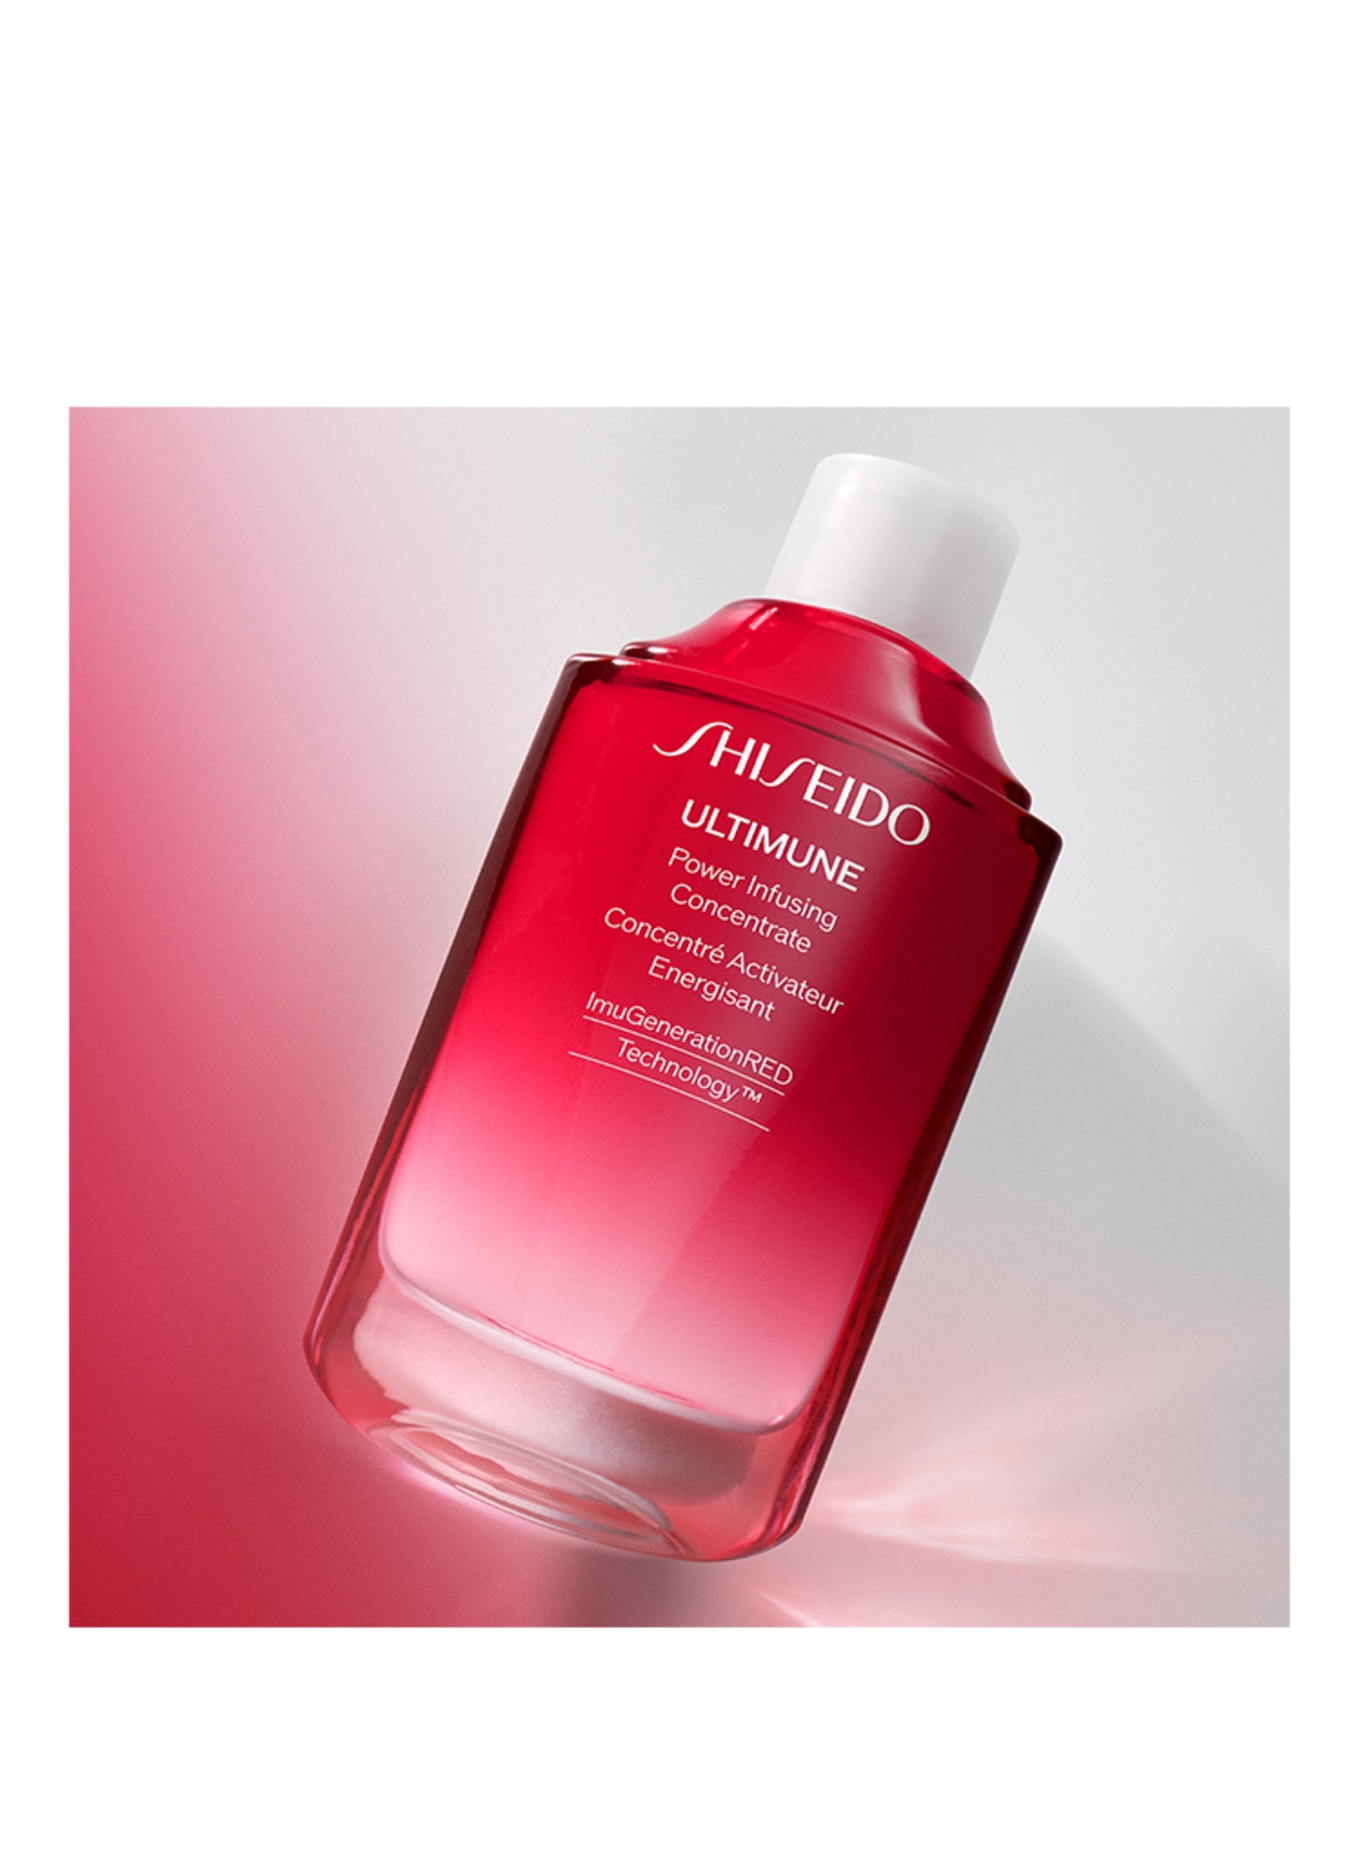 SHISEIDO ULTIMUNE POWER INFUSING CONCENTRATE REFILL (Bild 3)